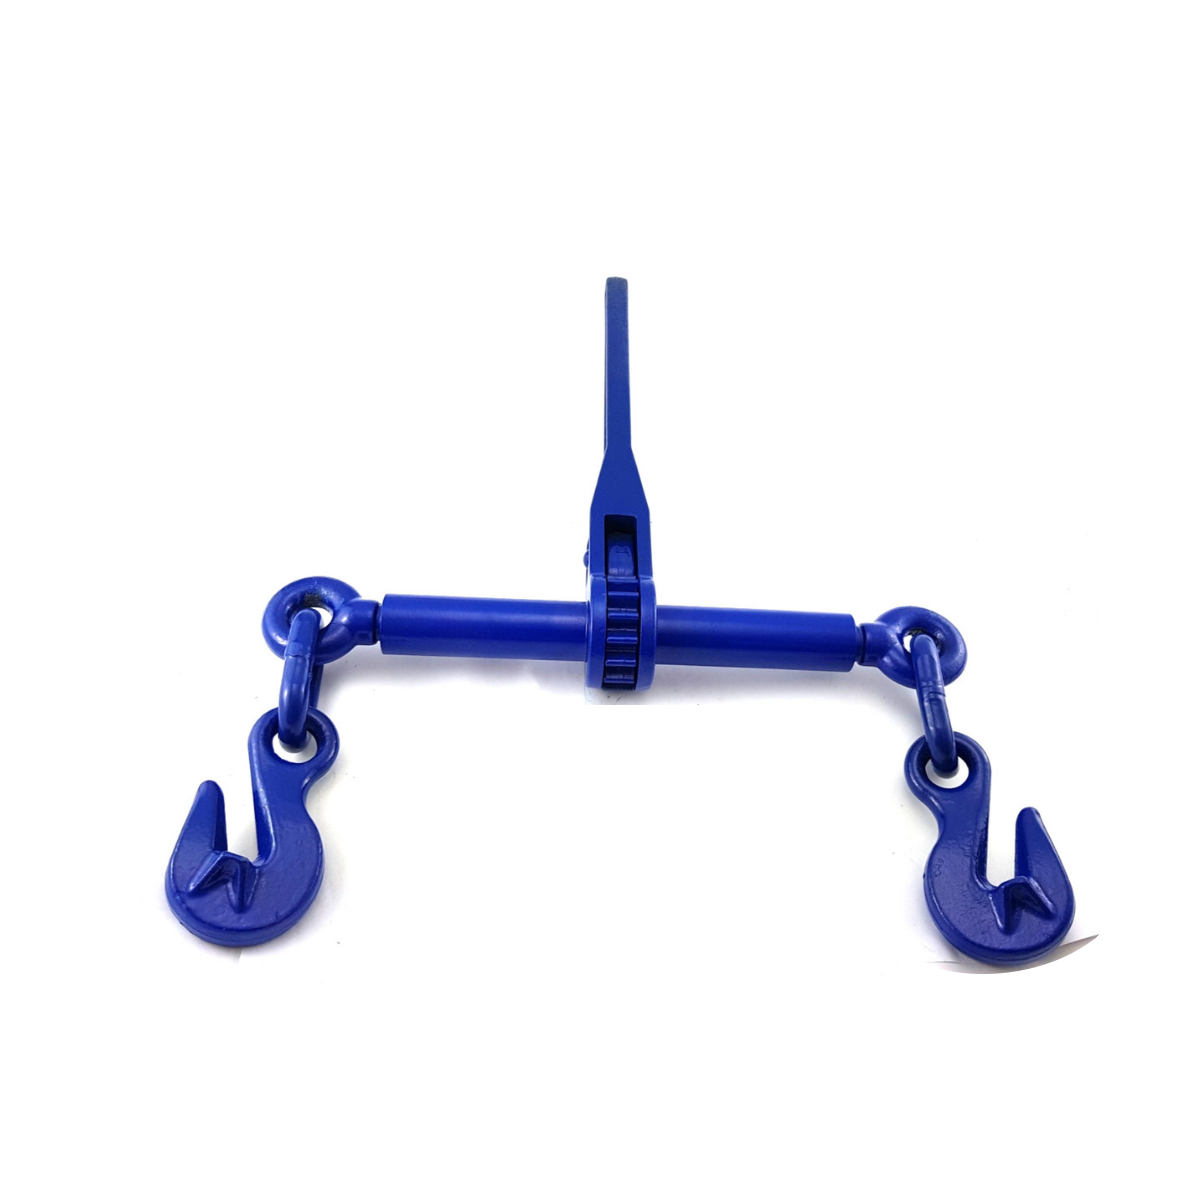 Ratchet Load Binder (Ratchet dog) with 7-8mm grab. Australia wide shipping + Melbourne click and collect. Shop lifting, rigging and load restraint products online. Chain.com.au